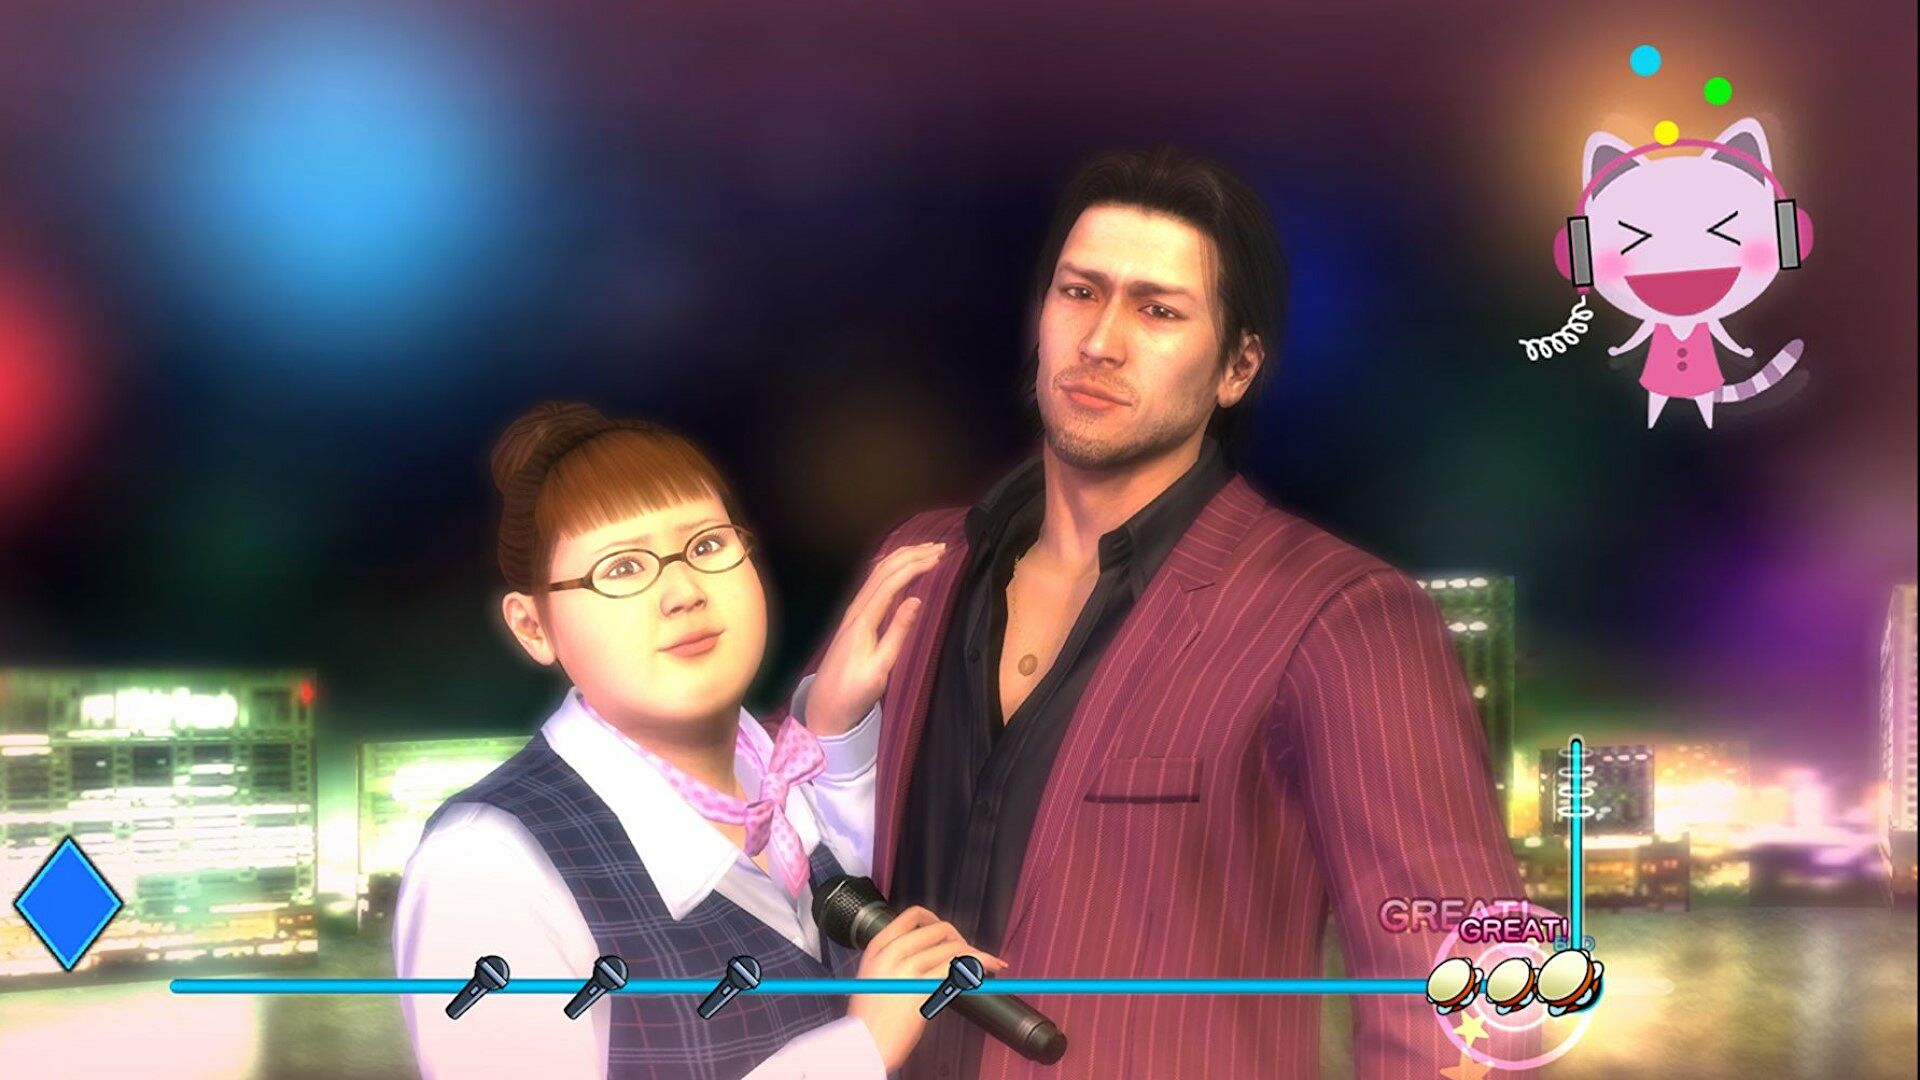 Now we know why Yakuza games are obsessed with karaoke